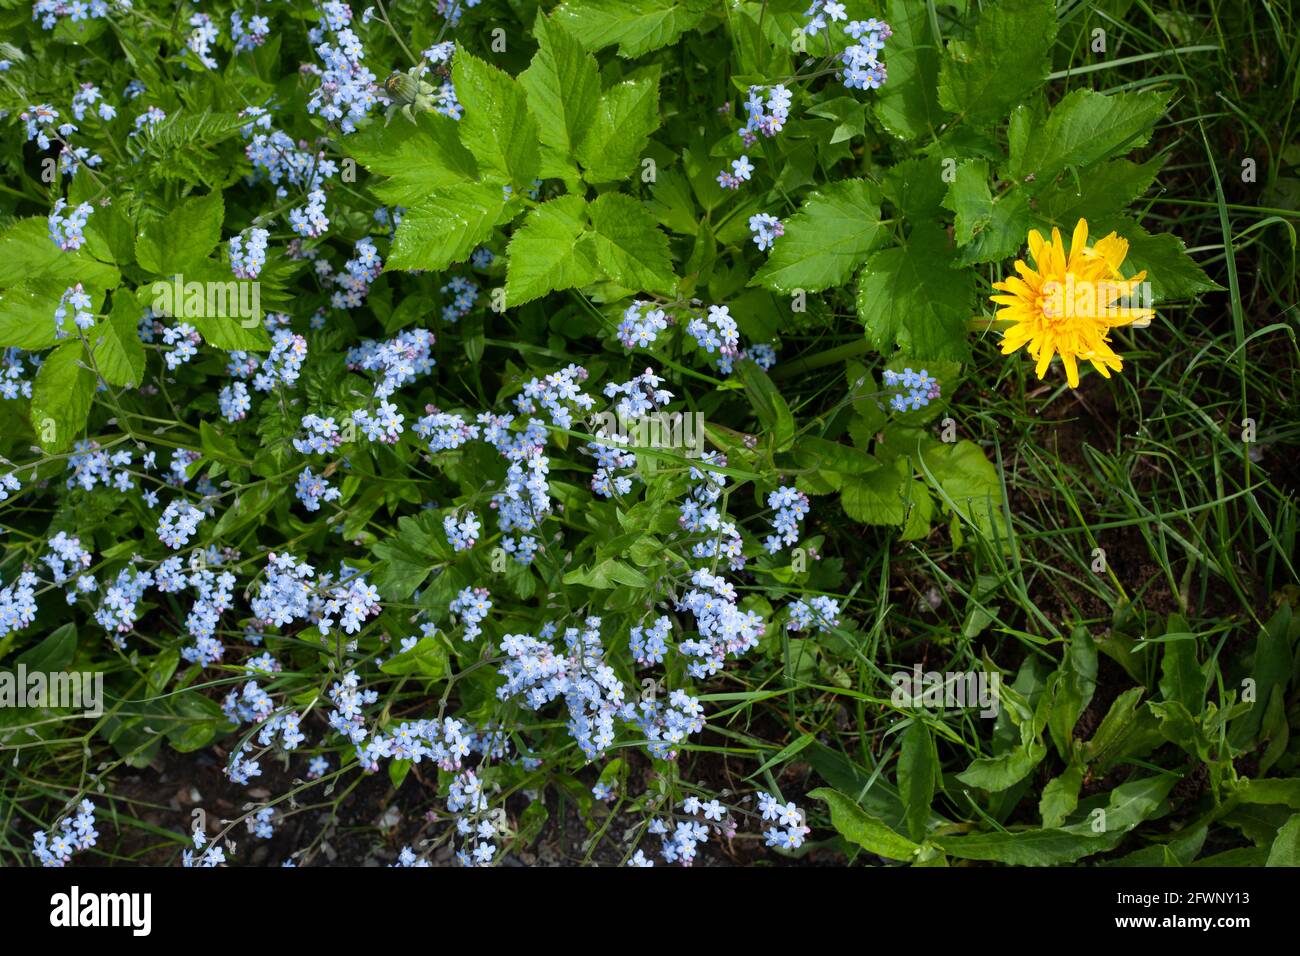 a yellow dandelion and small blue flowers are surrounded by green grasses Stock Photo